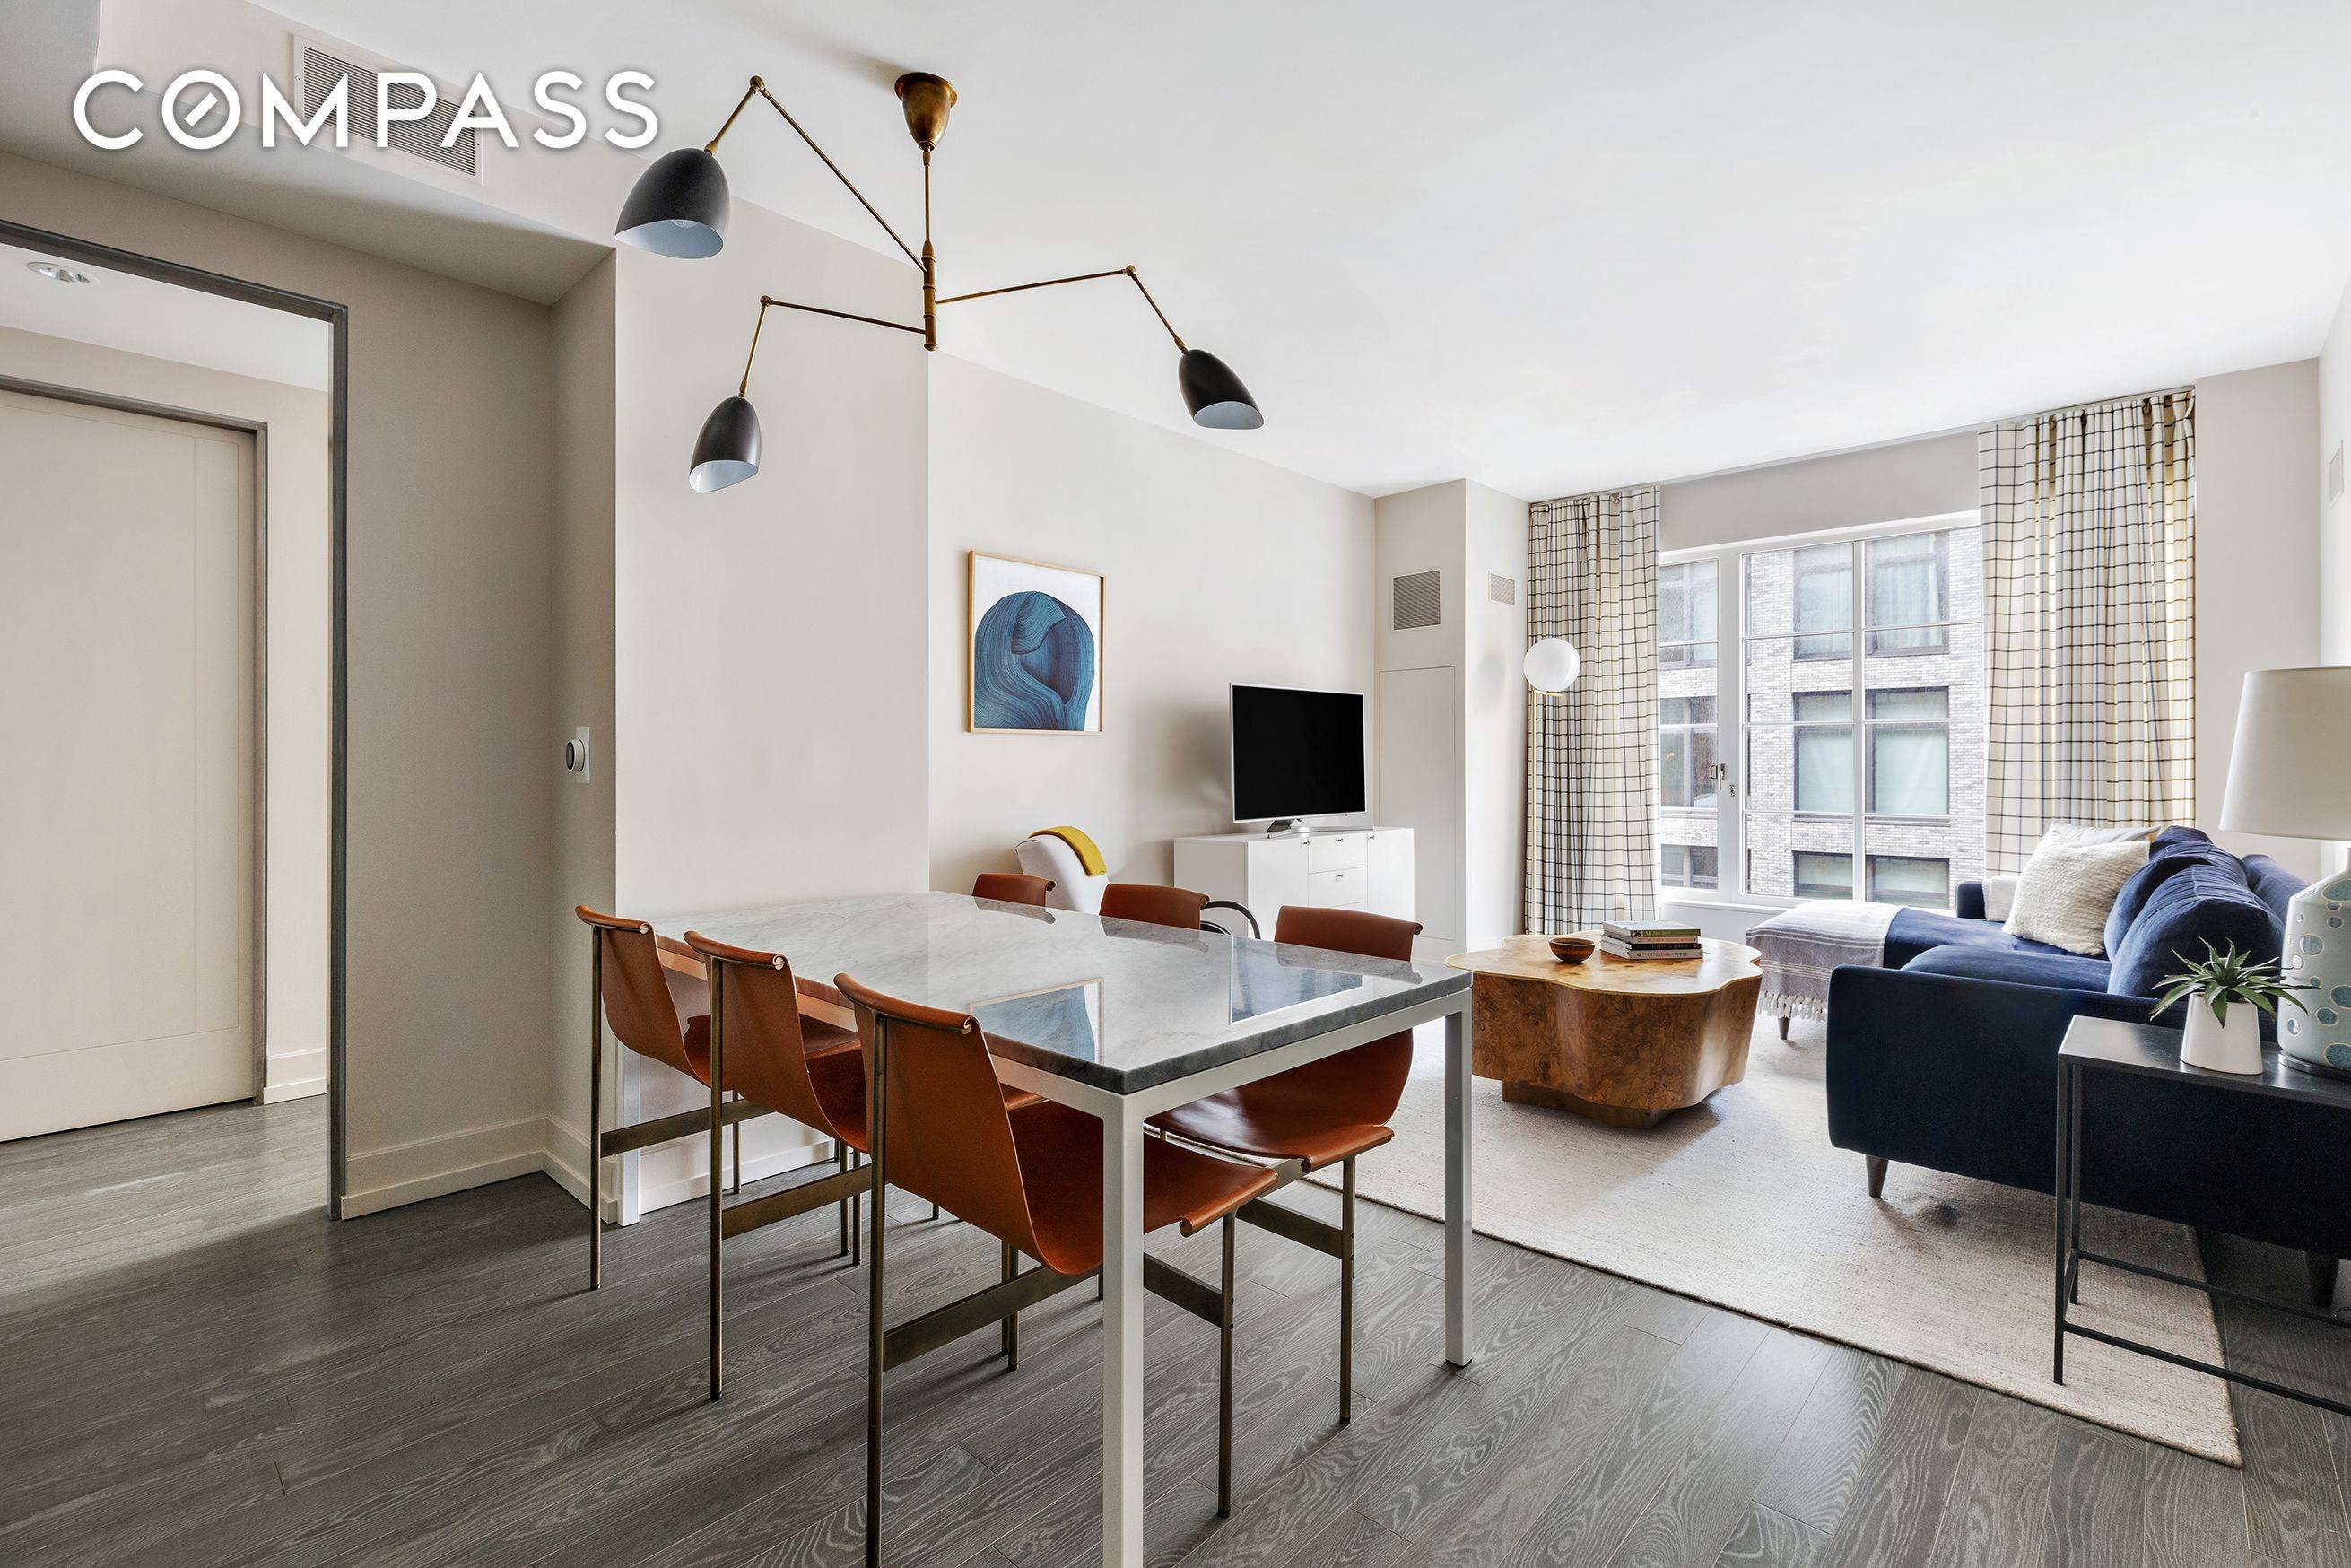 Perched high on the 11th floor of luxurious 70 Charlton, is picture perfect 11E, a winged two bedroom two bath residence in the heart of Hudson Square.